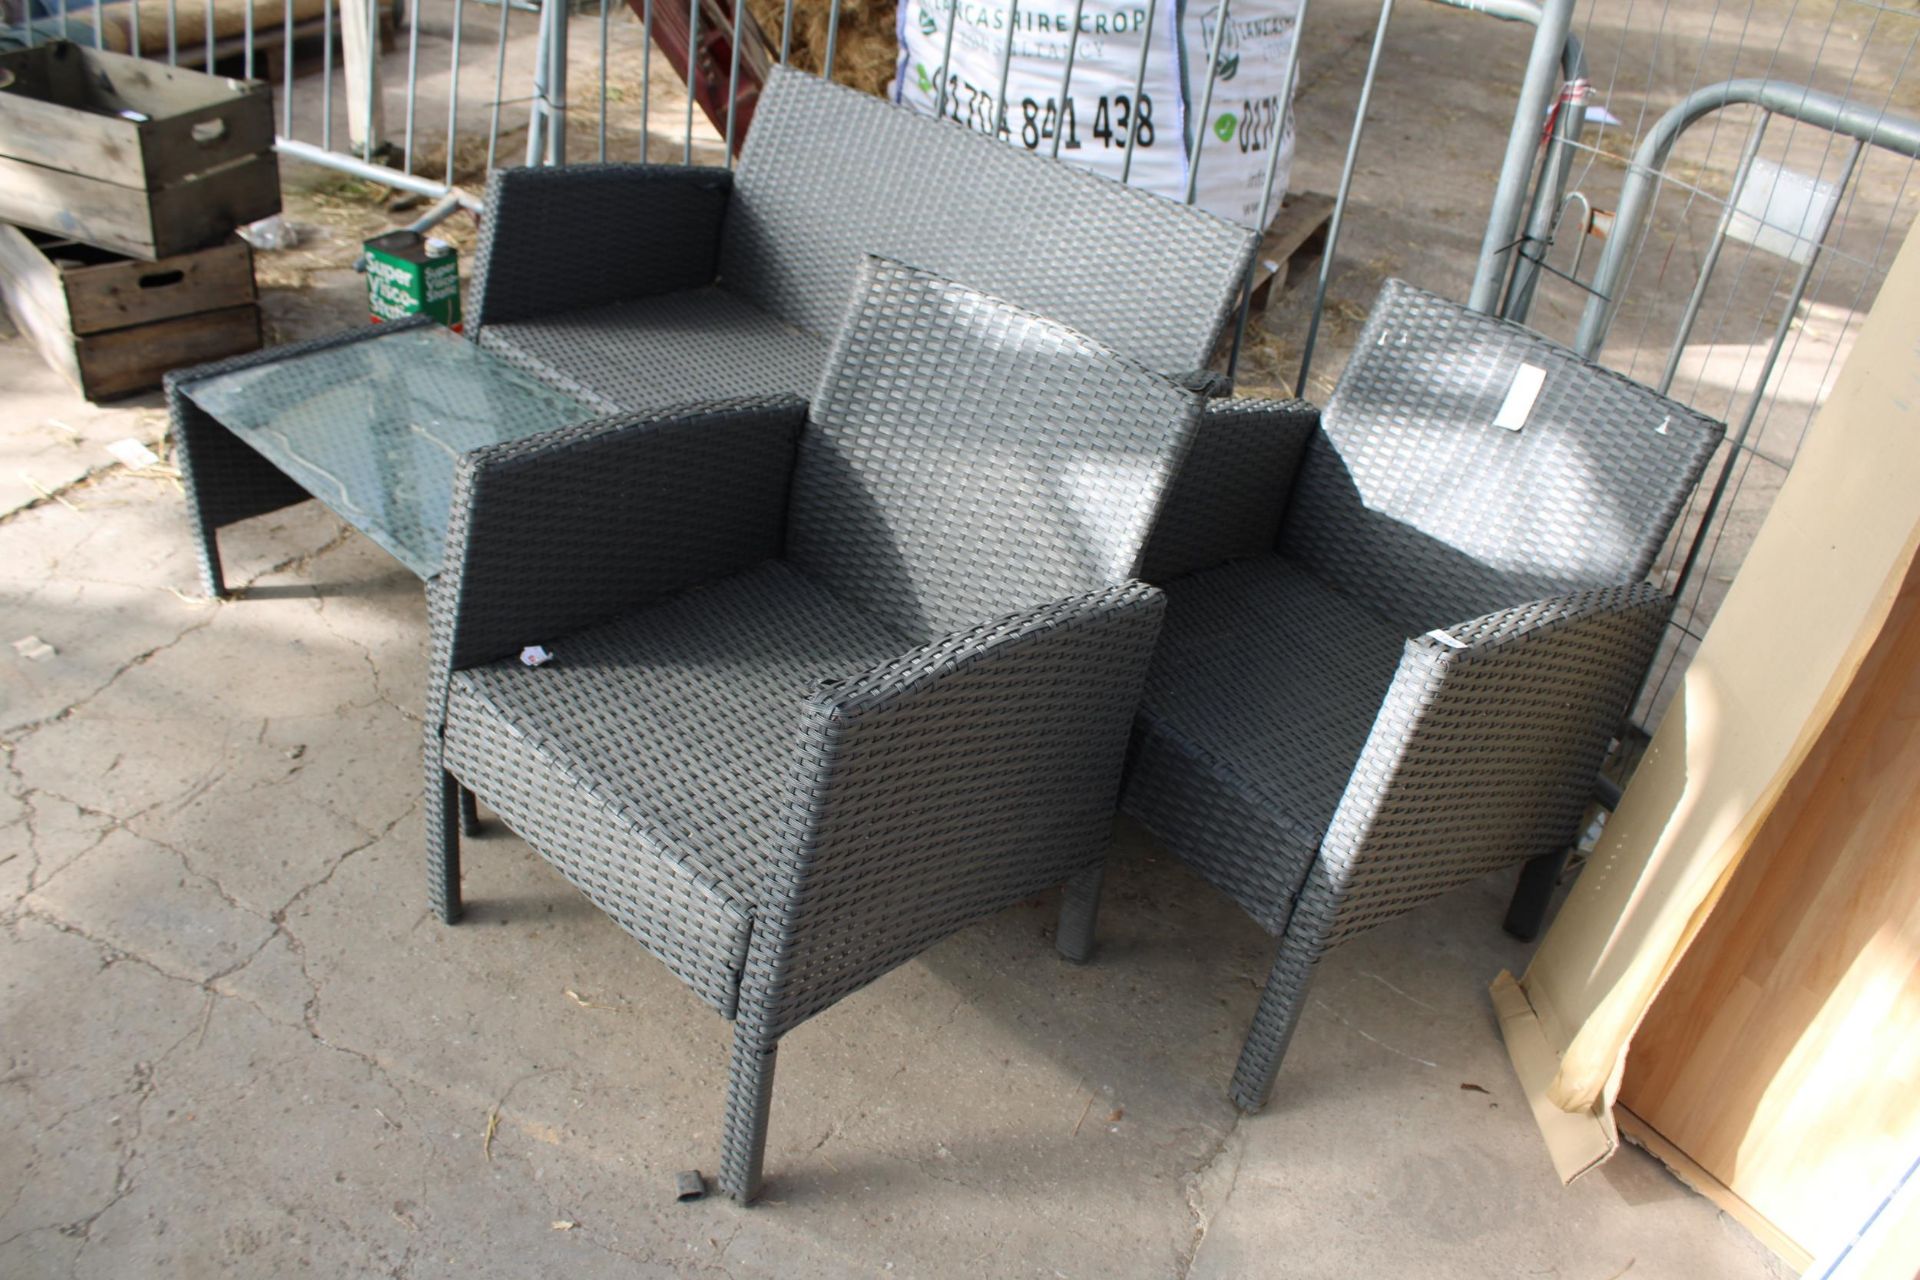 A RATTAN GARDEN FURNITURE SET COMPRISING OF A TWO SEATER BENCH, TWO CHAIRS AND A COFFEE TABLE - Bild 2 aus 3